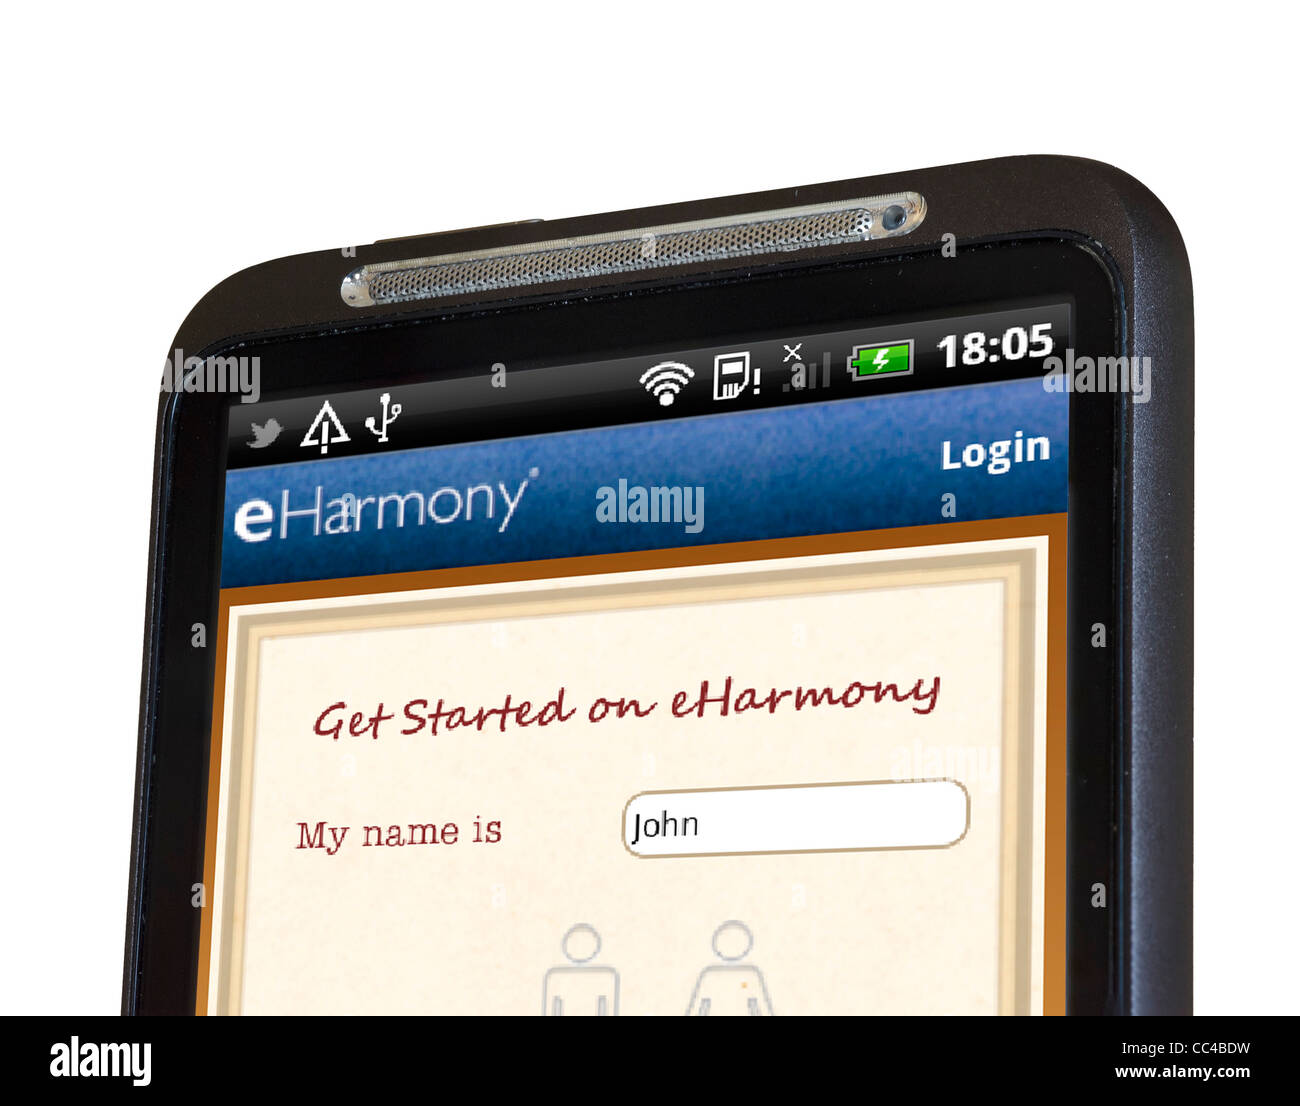 The eHarmony online dating app on an HTC smartphone Stock Photo